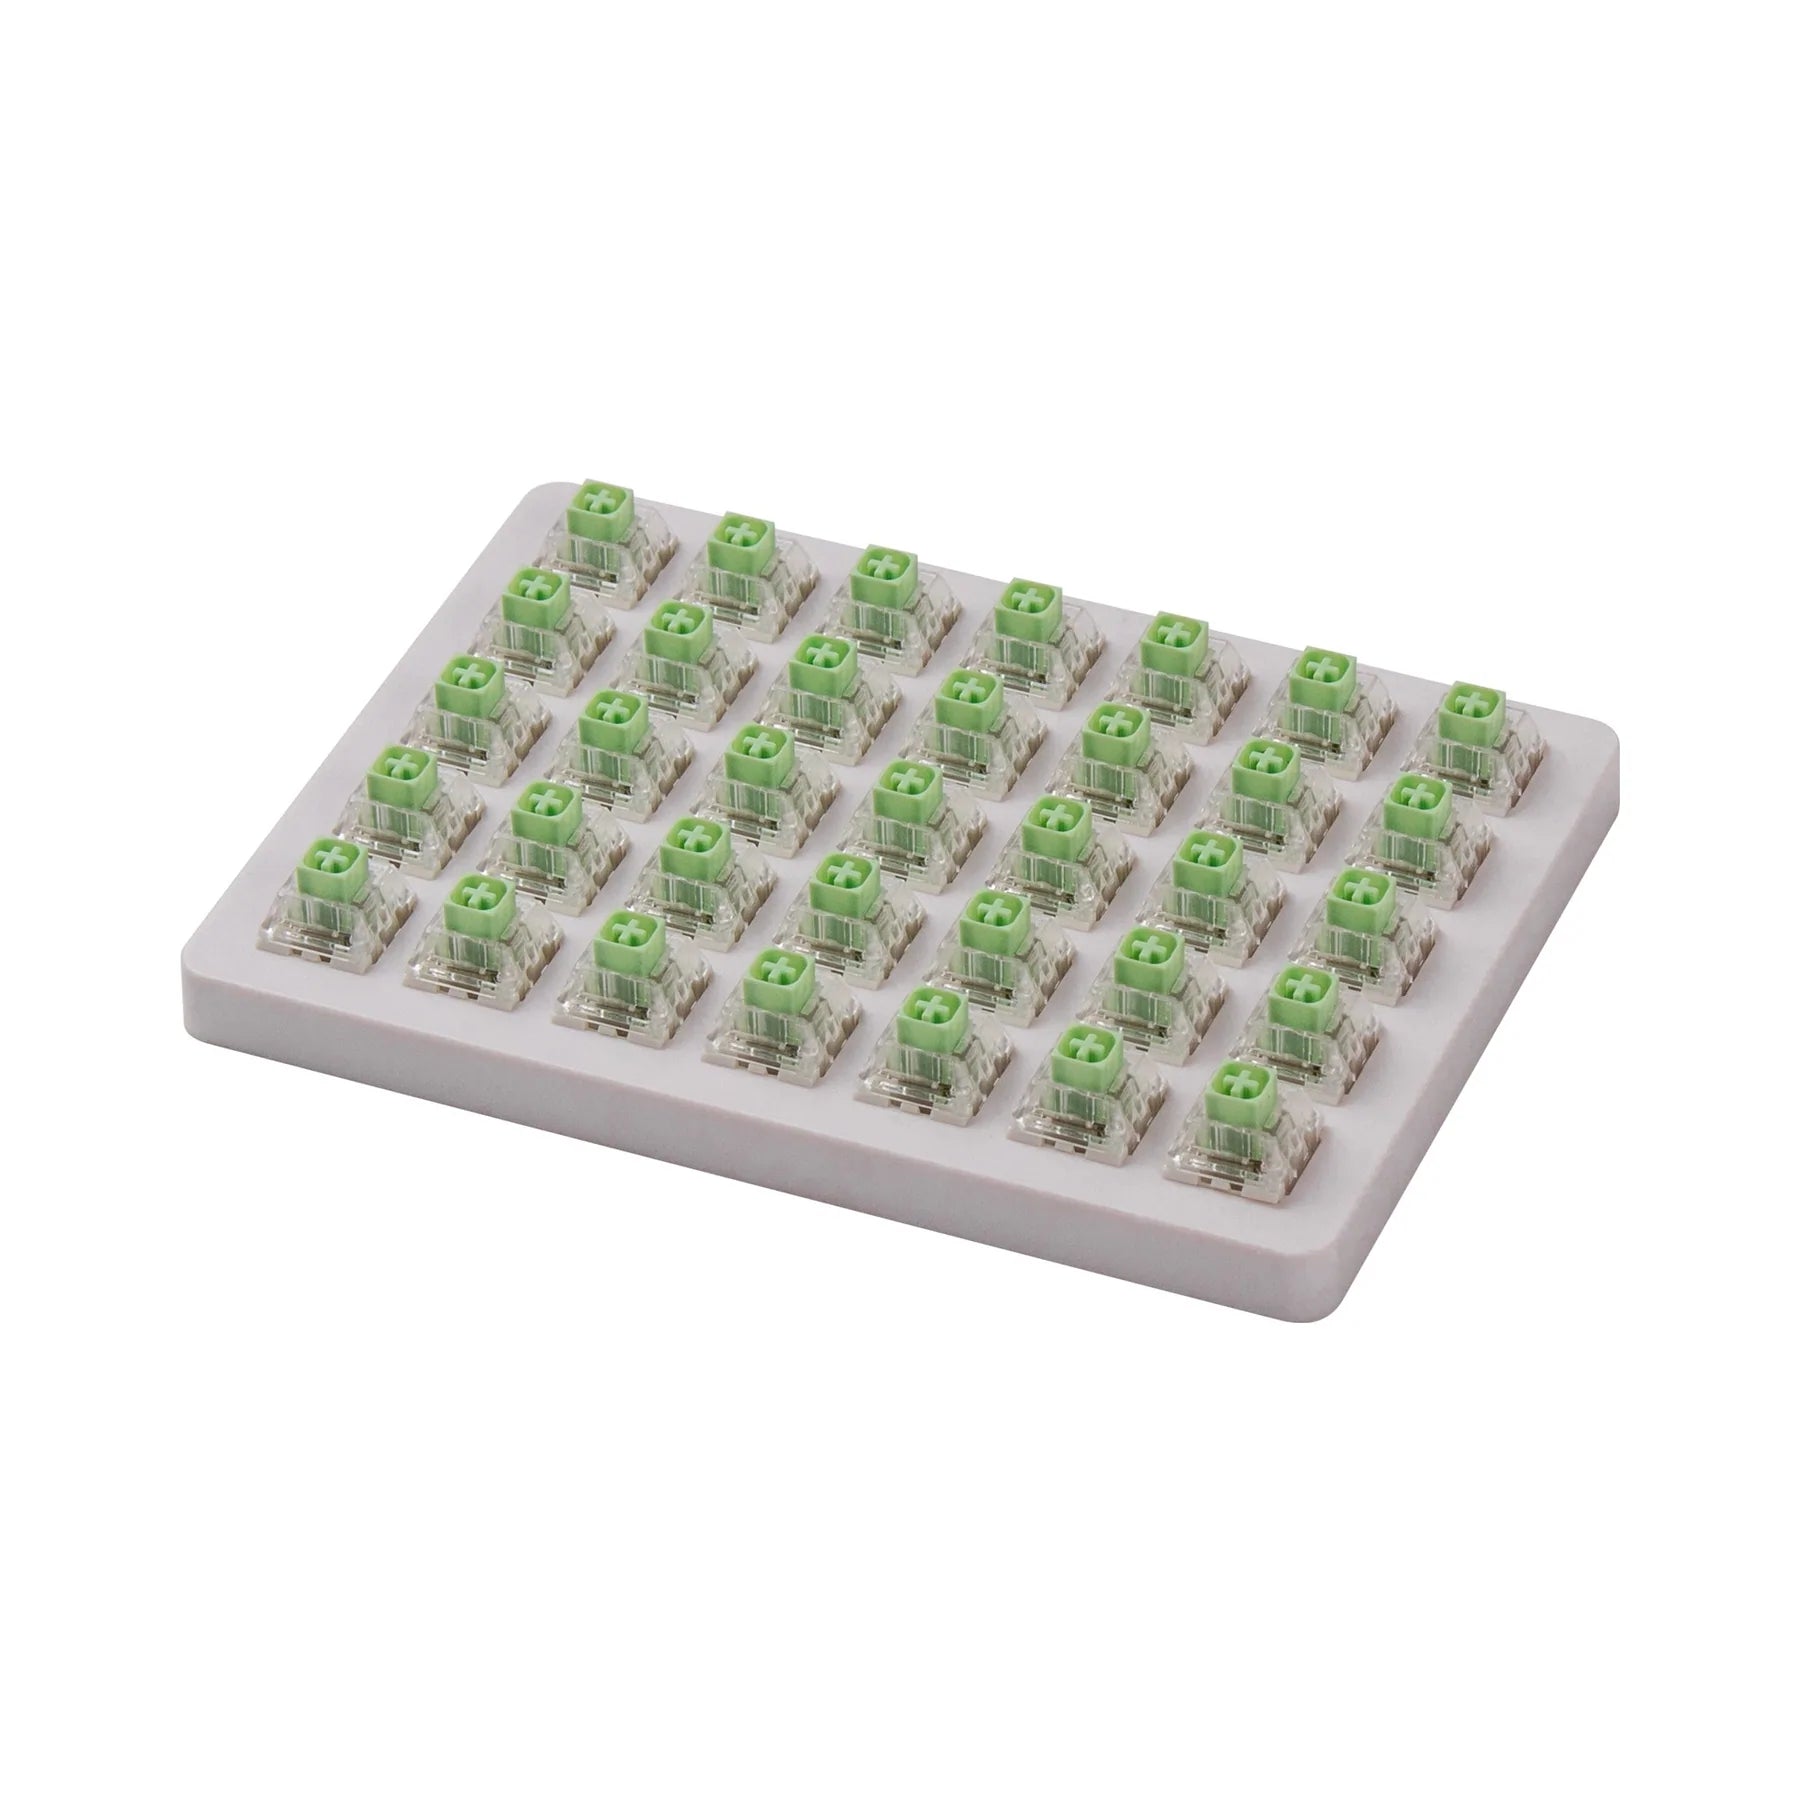 Kailh Box Thick Clicky Switch 35pcs Jade